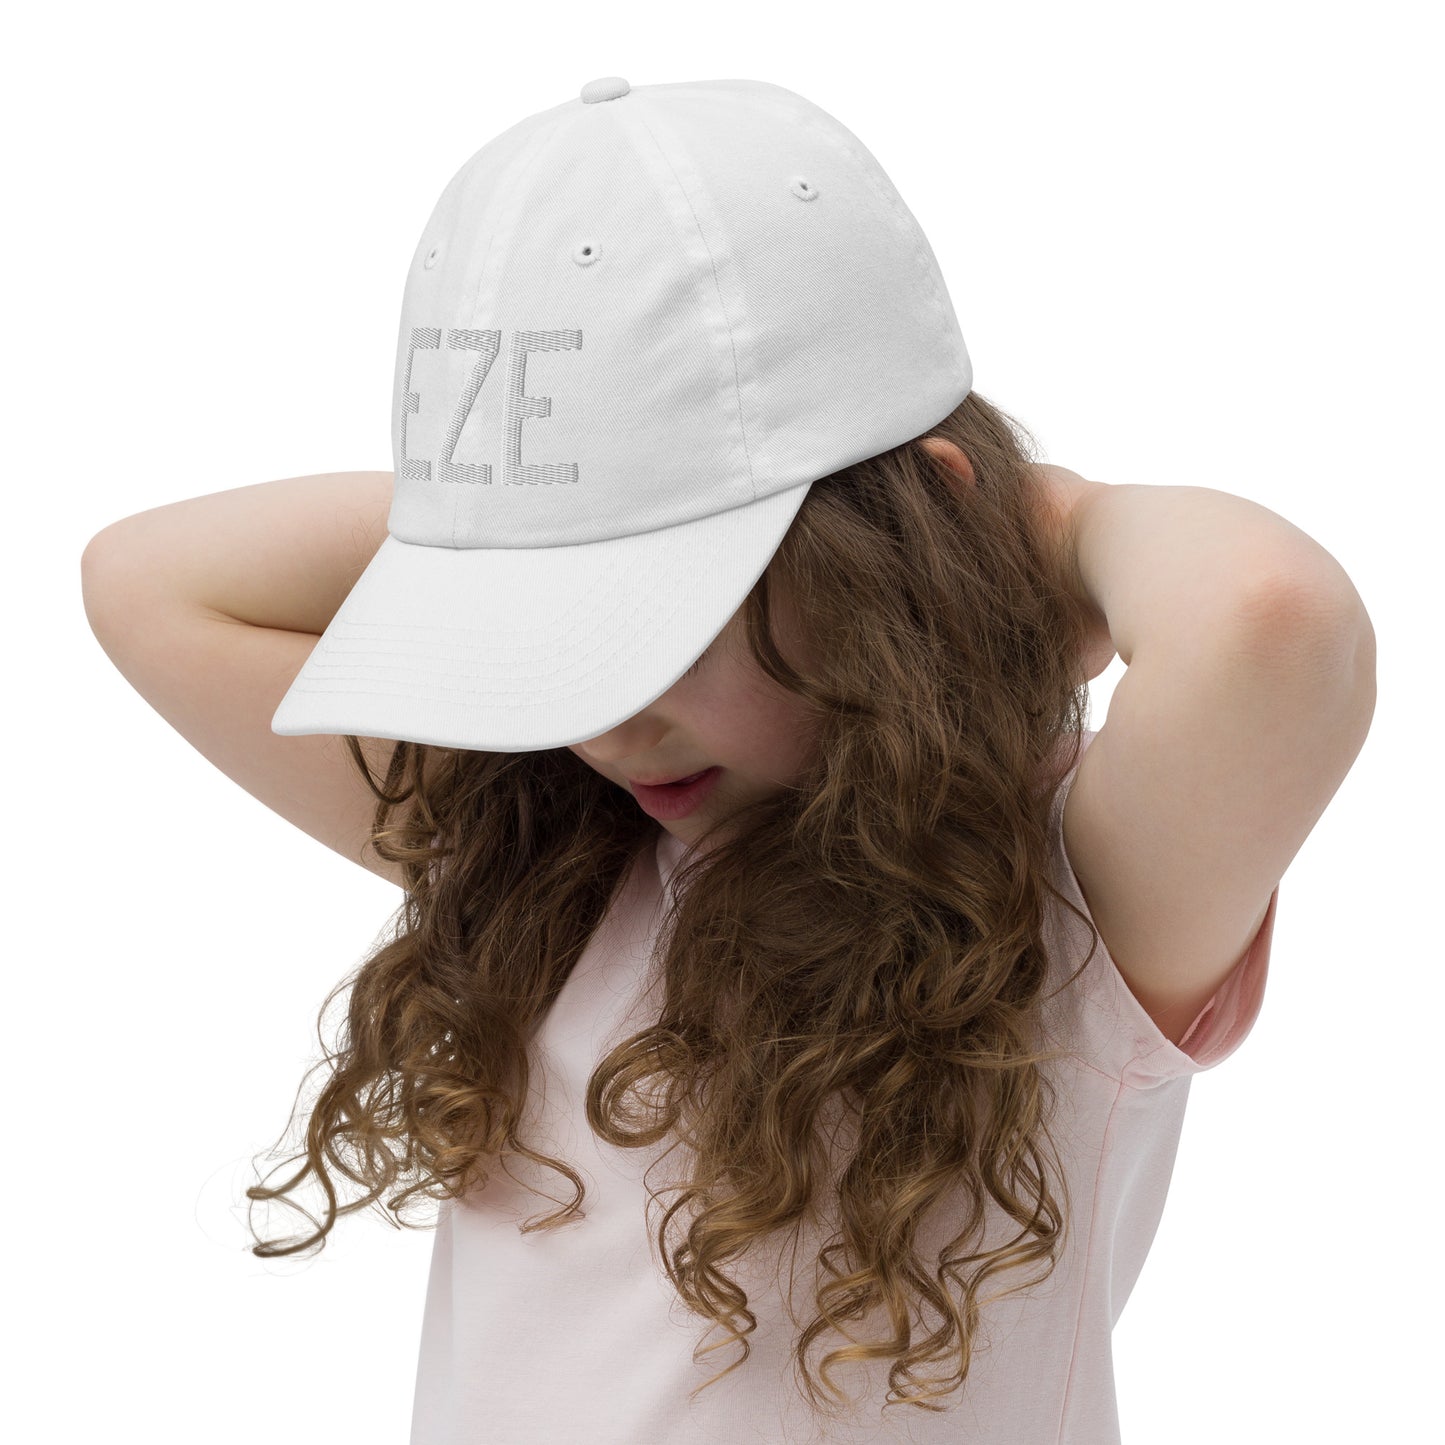 Airport Code Kid's Baseball Cap - White • EZE Buenos Aires • YHM Designs - Image 10